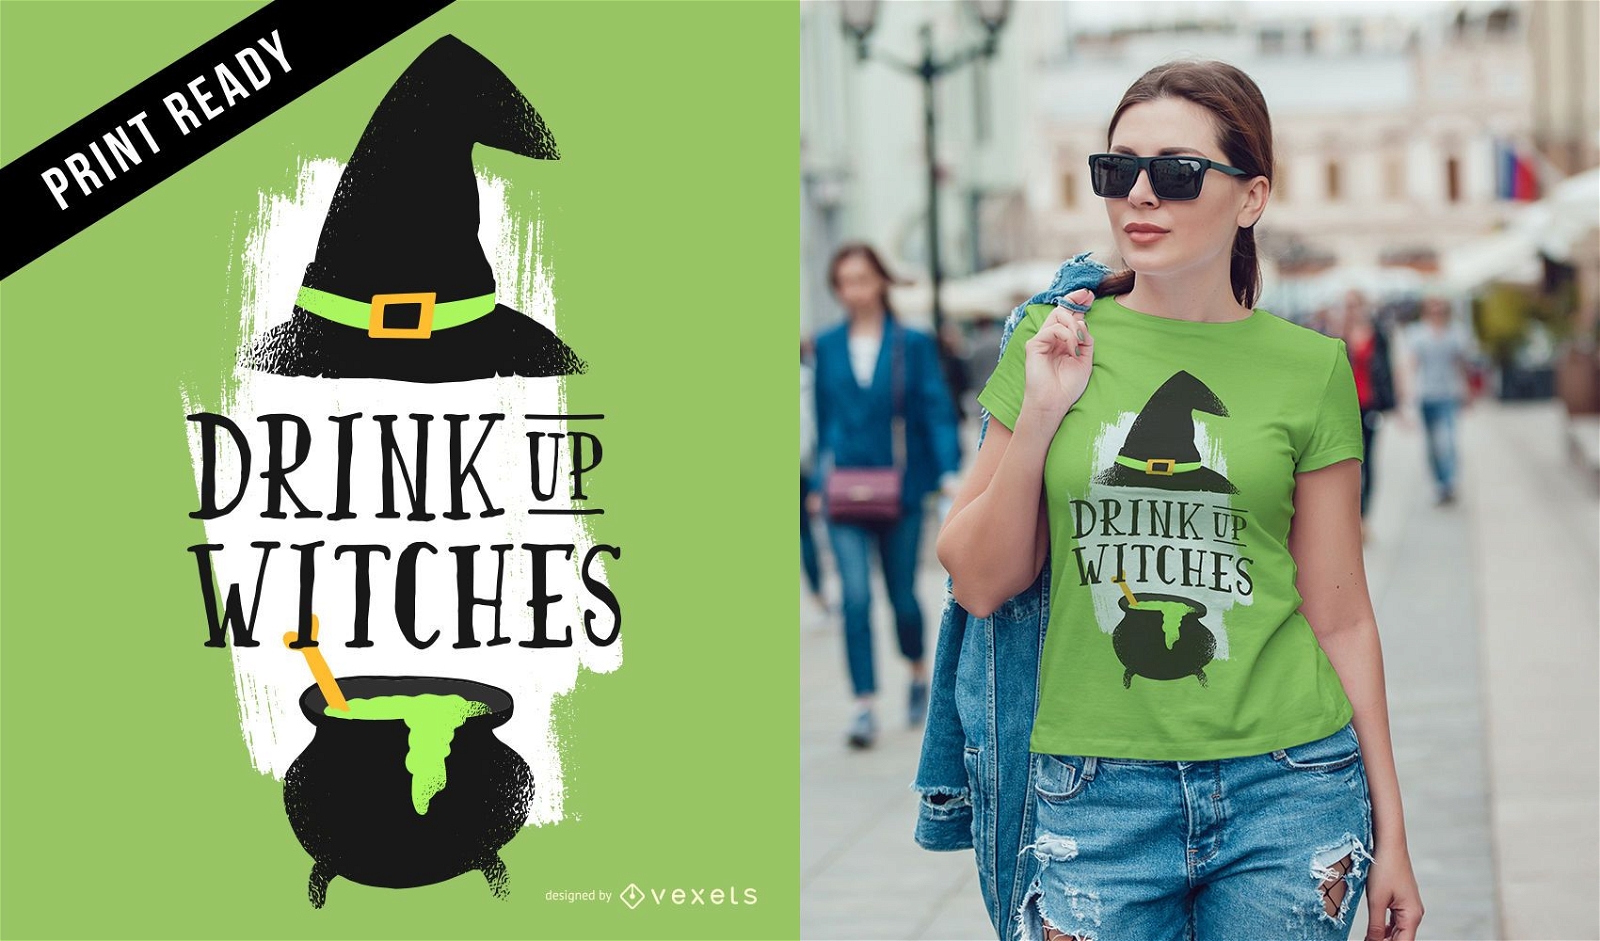 Drink up witches t-shirt design